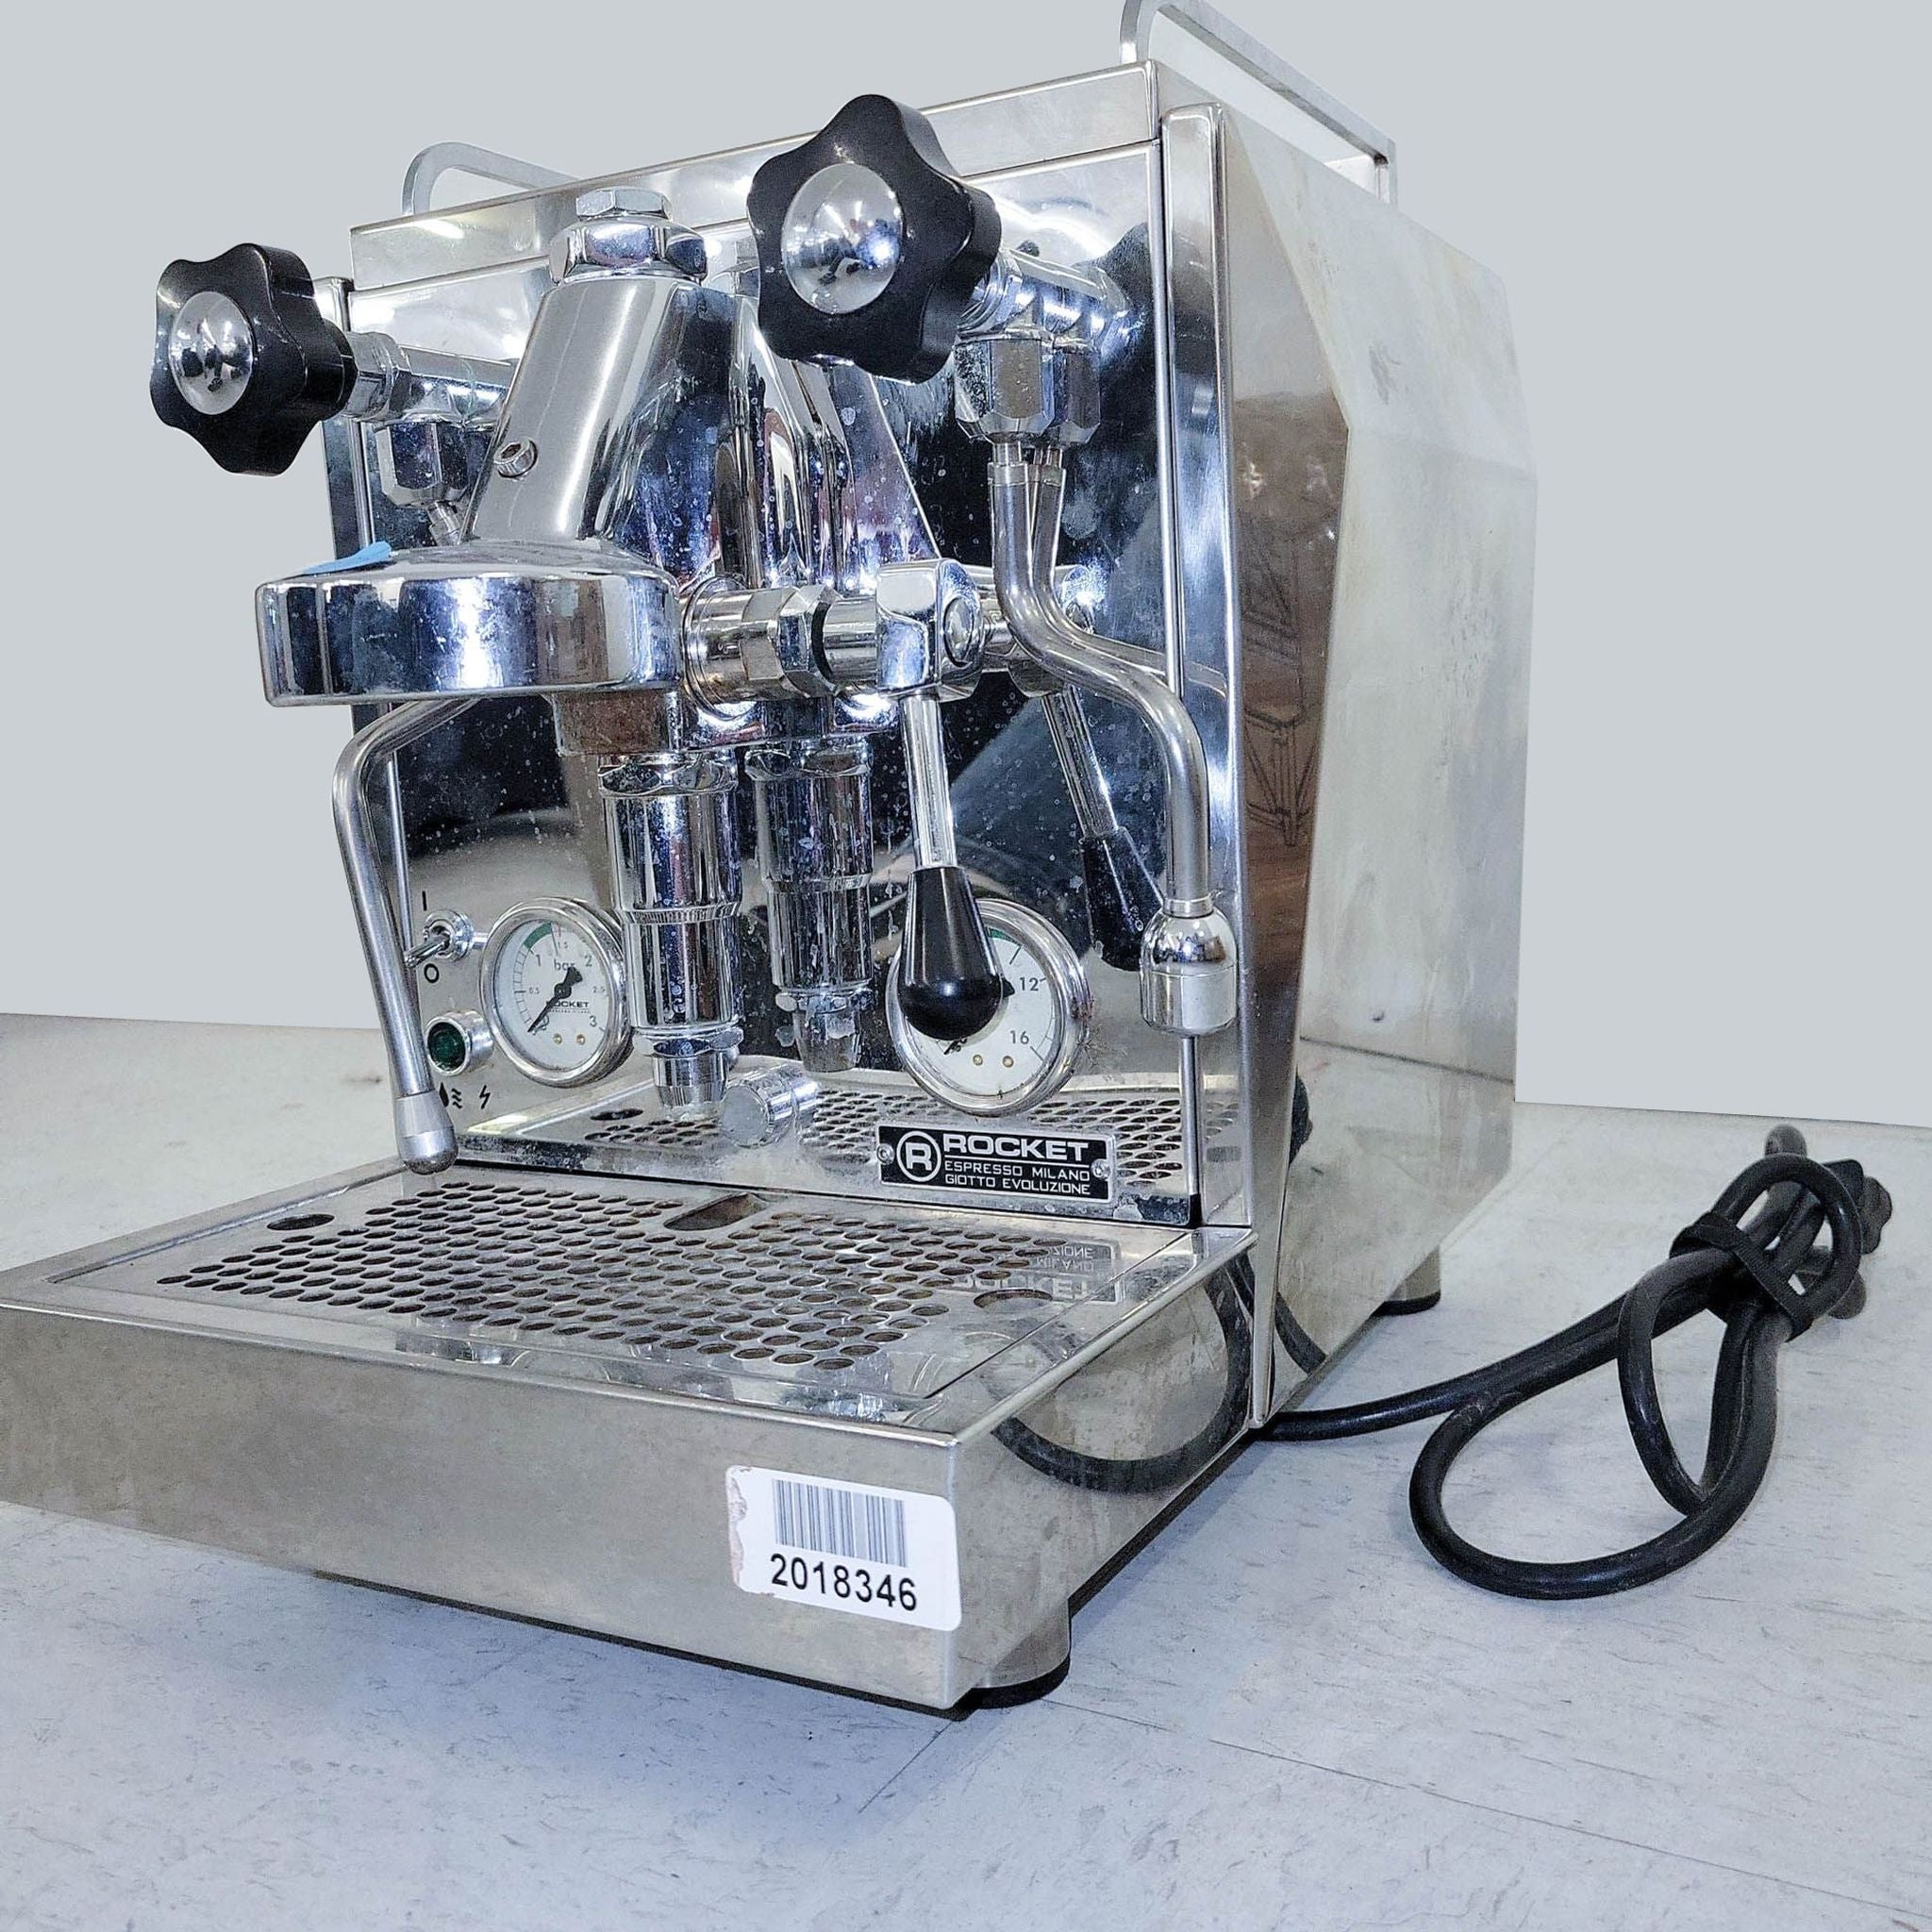 Side view of a sleek Rocket Espresso coffee maker featuring pressure gauge and stainless steel design.